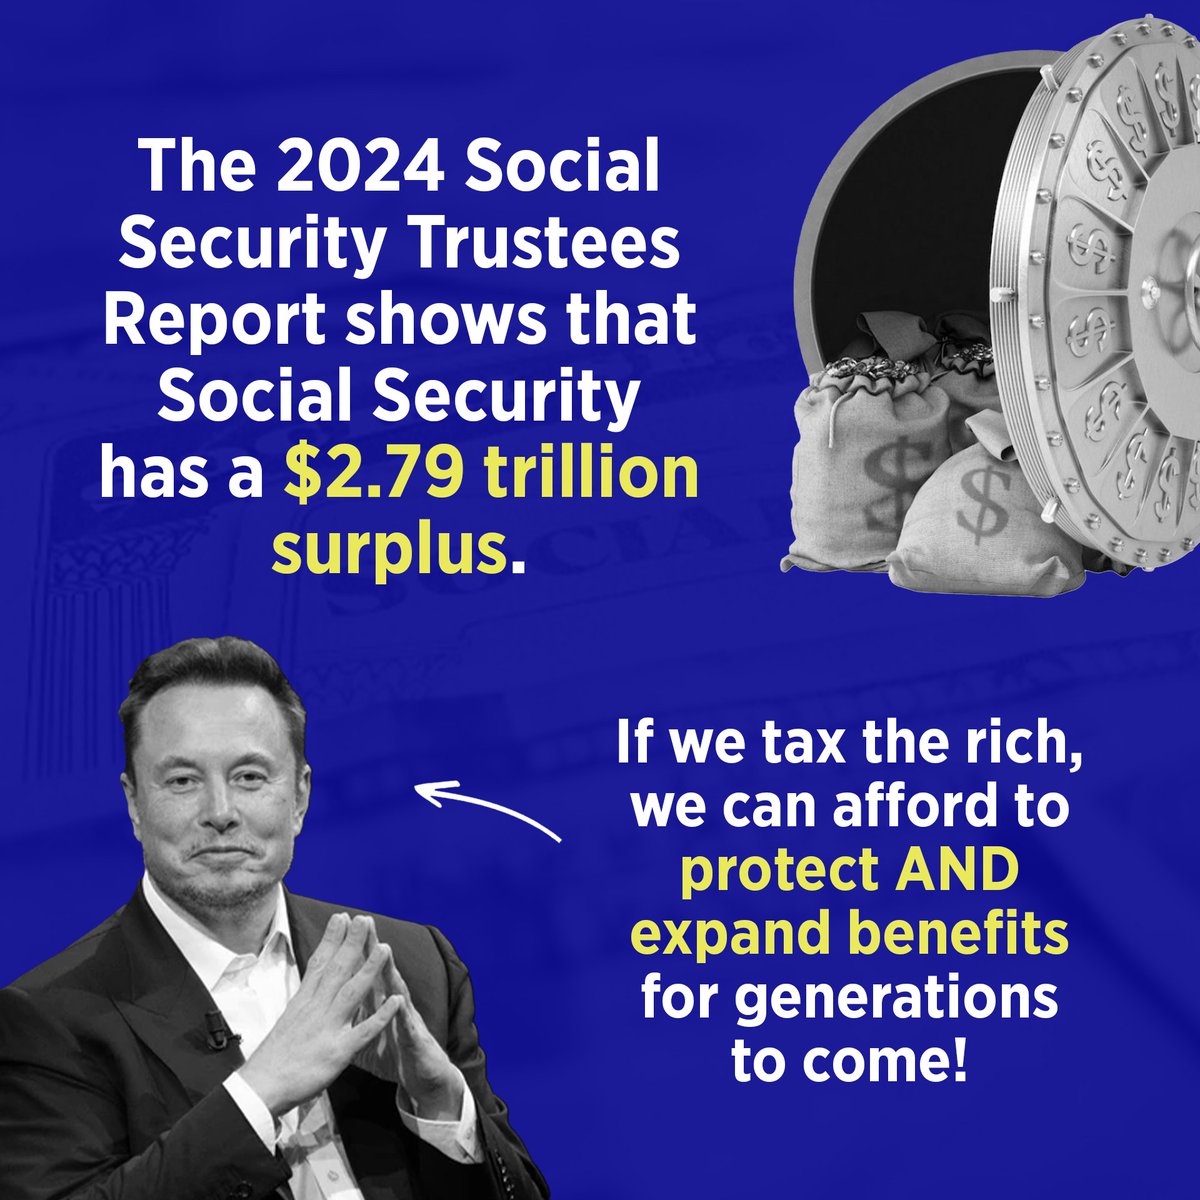 If billionaires were made to pay their fair share in taxes, we could continue to deliver Social Security benefits to retirees, people with disabilities, and survivors for years to come.